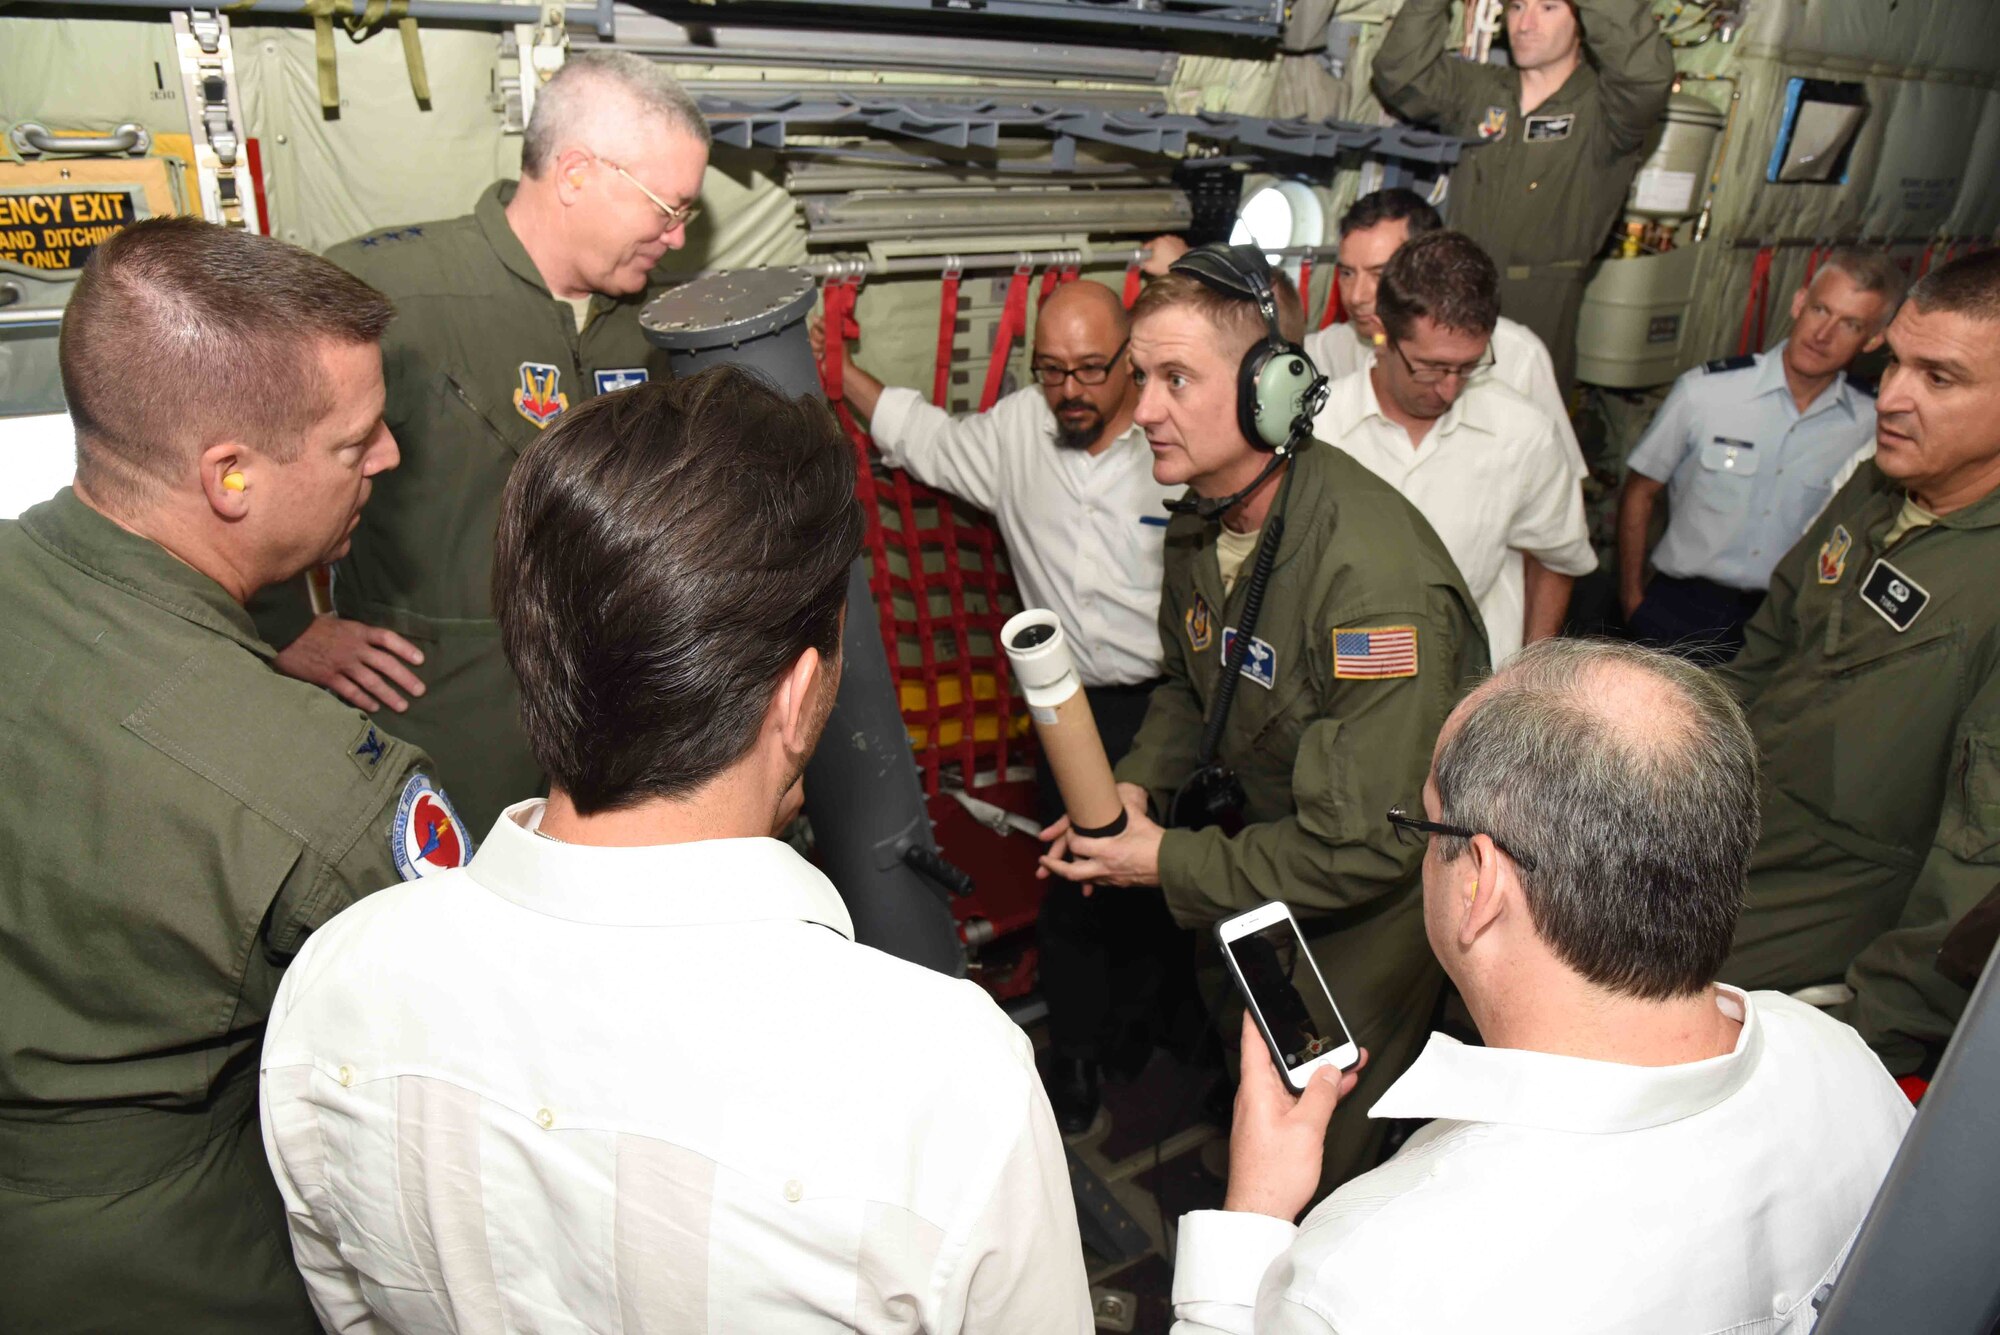 Lt. Gen. William H. Etter (top left), Continental North American Aerospace Defense Region-1st Air Force (Air Forces Northern), listens to Chief Master Sgt. Rick Cumbo, 53rd Weather Reconnaissance Squadron chief weather reconnaissance loadmaster, explain to Mexican officials how a dropsonde collects weather data during hurricane flights. The general, along with Refael Pacchiano Alaman (bottom left), Secretary of Environment and Natural Resources, Mexico, and Roberto Ramirez de la Parra (bottom right), Director General of Con Agua, Mexico, (second from right), 53rd WRS “Hurricane Hunters” and National Oceanic and Atmospheric Administration officials flew on a Hurricane Hunter WC-130J weather aircraft from Cabo San Lucas to Puerto Vallarta, Mexico, April 12, 2016, during the first part of the 2016 Caribbean Hurricane Awareness Tour, which promotes hurricane preparedness throughout the Central American and Caribbean regions. (U.S. Air Force photo/Tech. Sgt. Ryan Labadens)